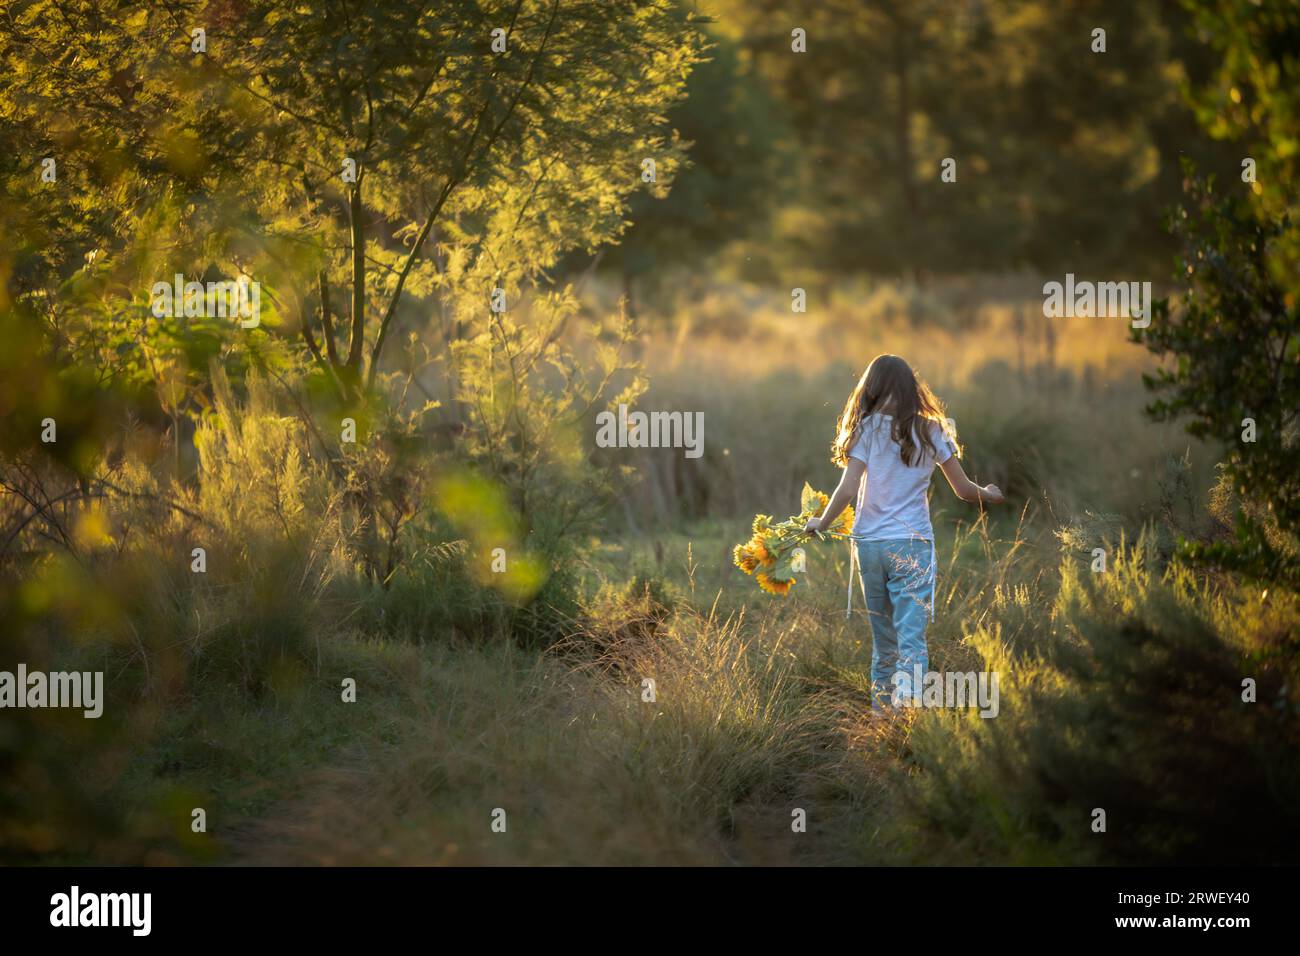 Rear view of a young girl walking through a field of long grass at sunset Stock Photo